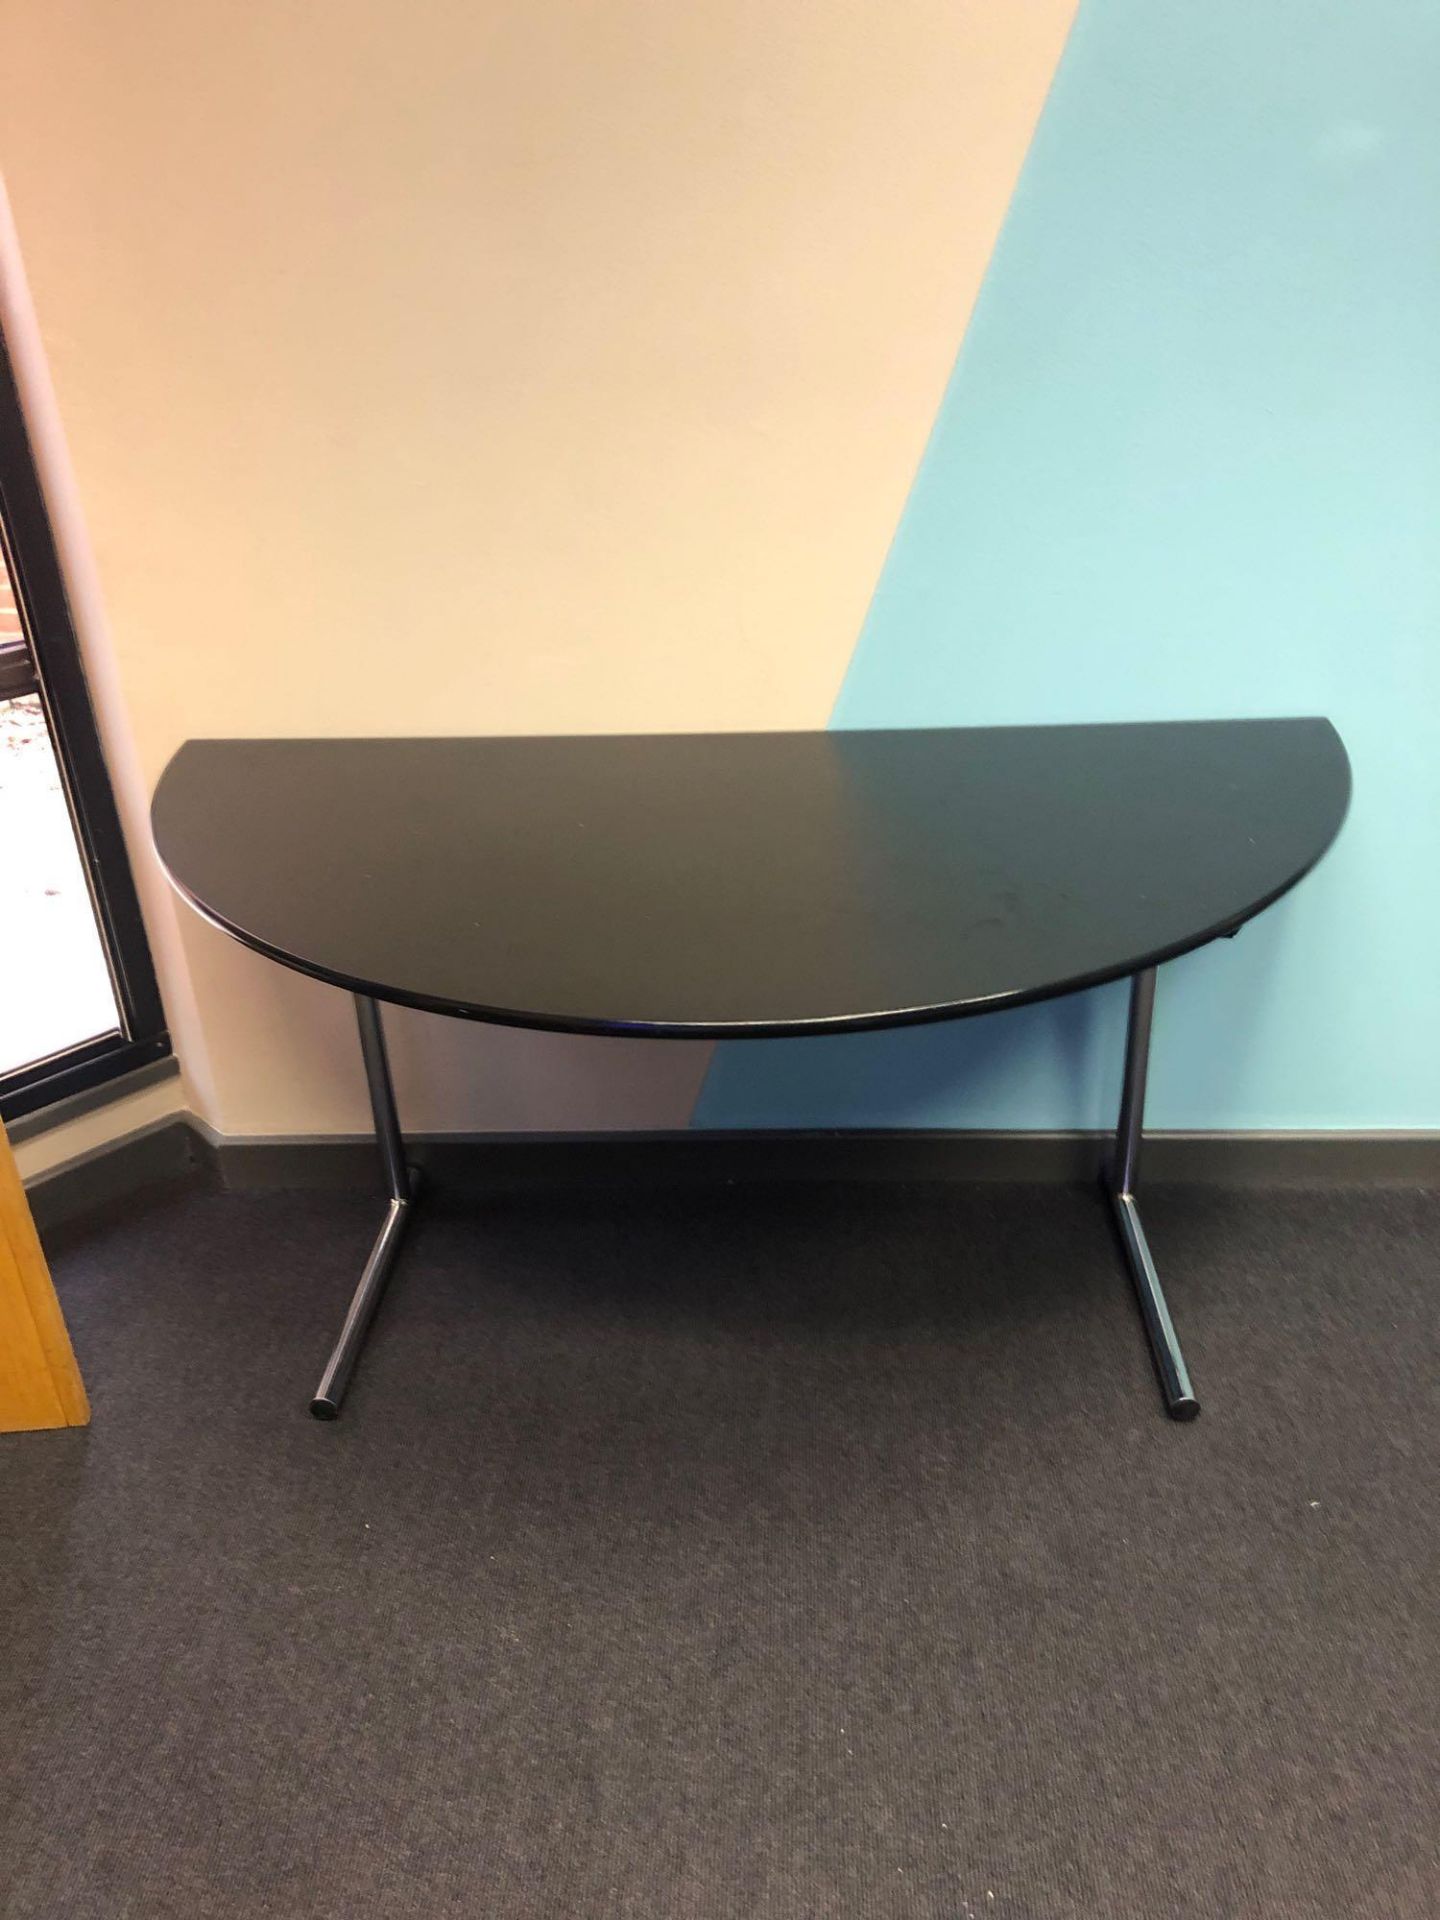 5x Burgess Furnitures Black And Chrome Conference Half Circle Tables 1500 x 750 Mm - Image 2 of 2